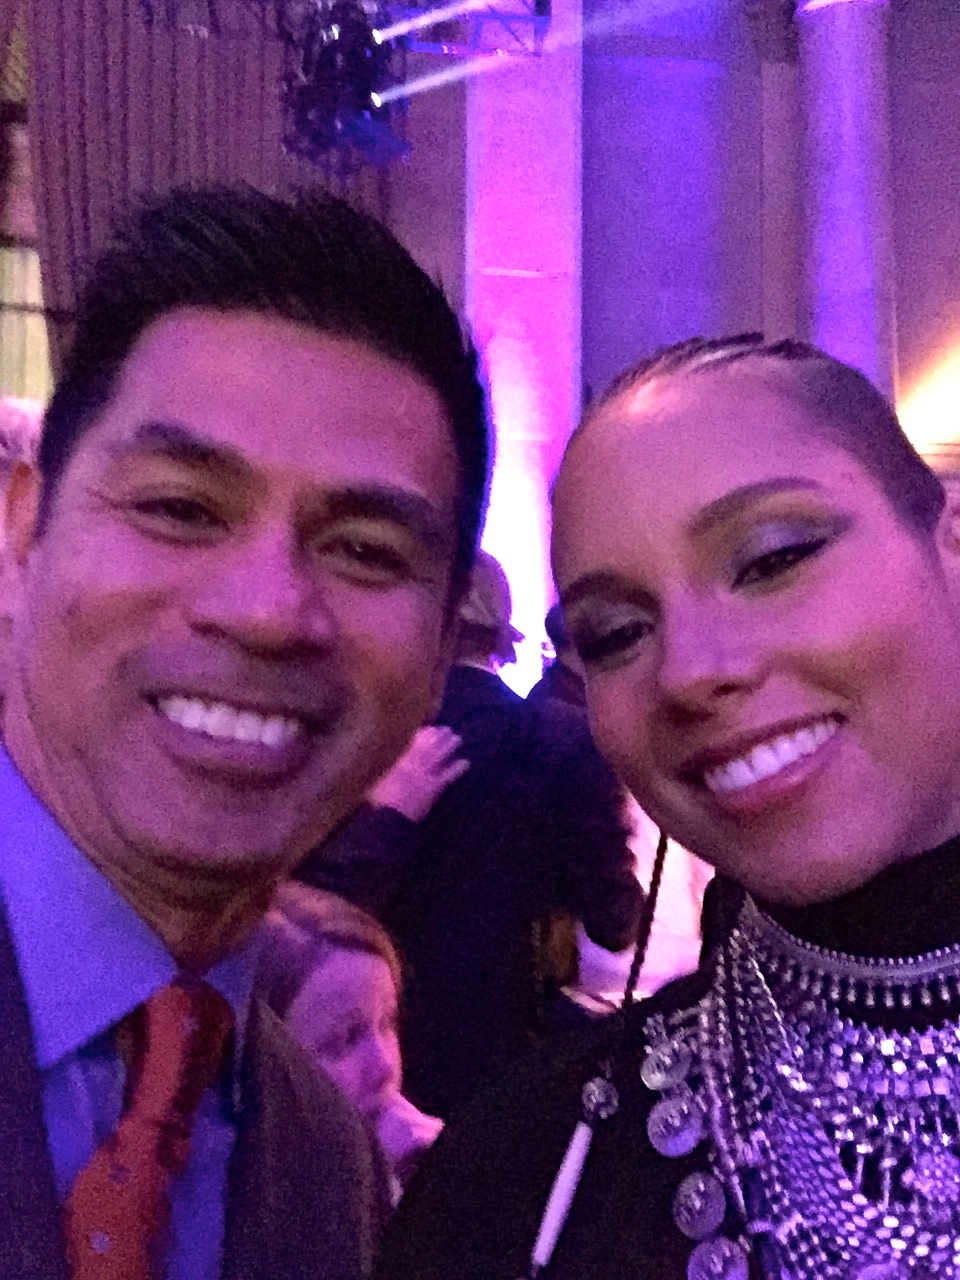 The Über talented and beautiful Alicia Keys